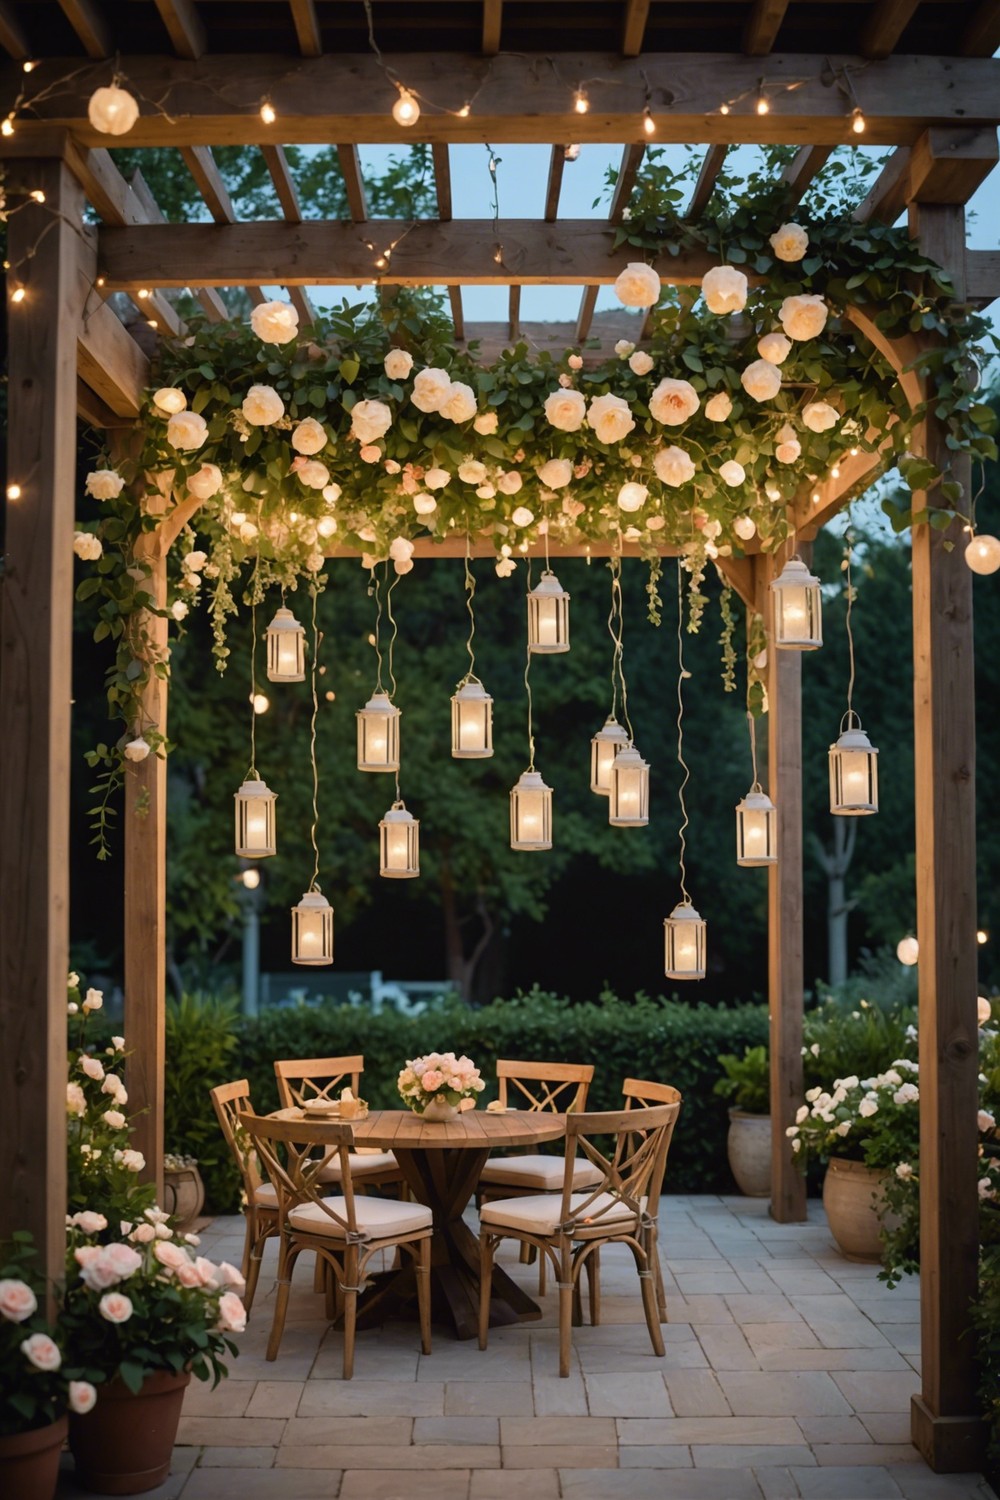 Hanging Floral Arrangements with Fairy Lights